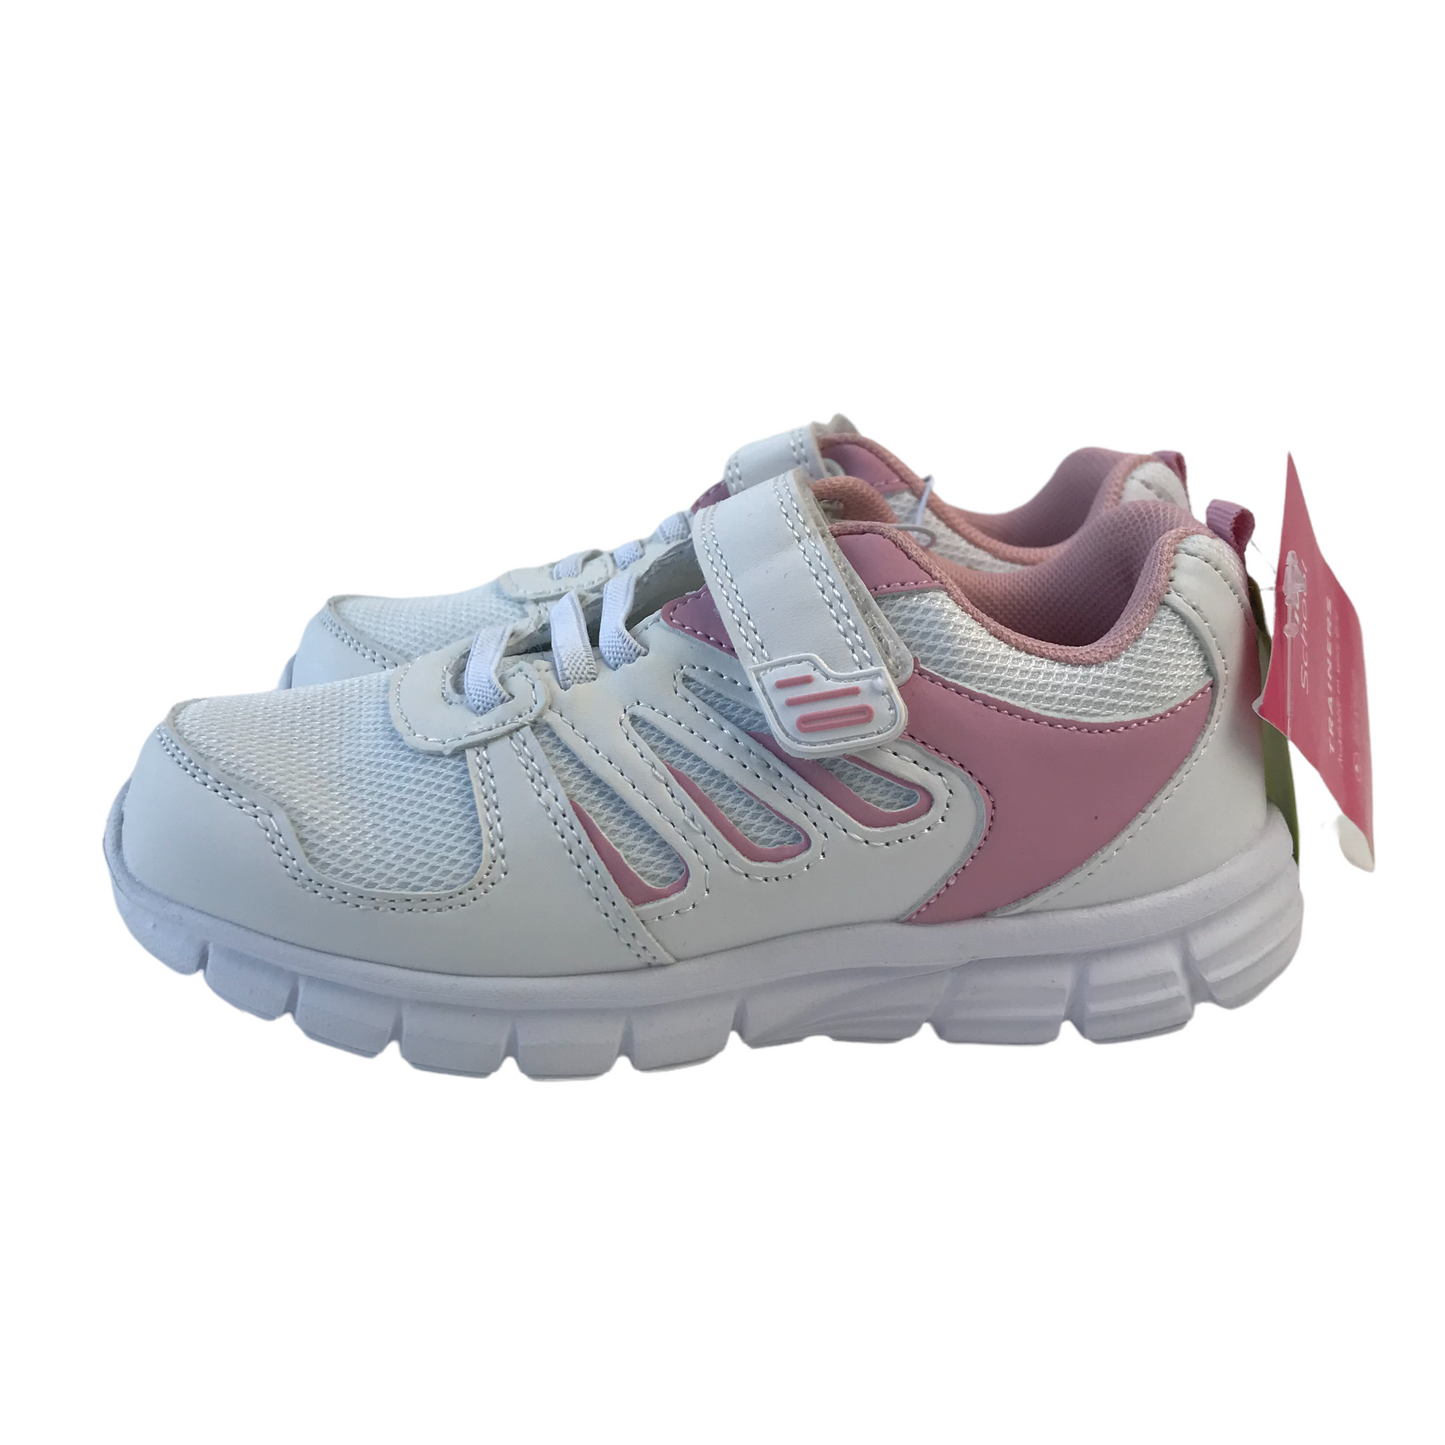 Tu White and Light Pink Trainers Shoe Size 11 (jr)